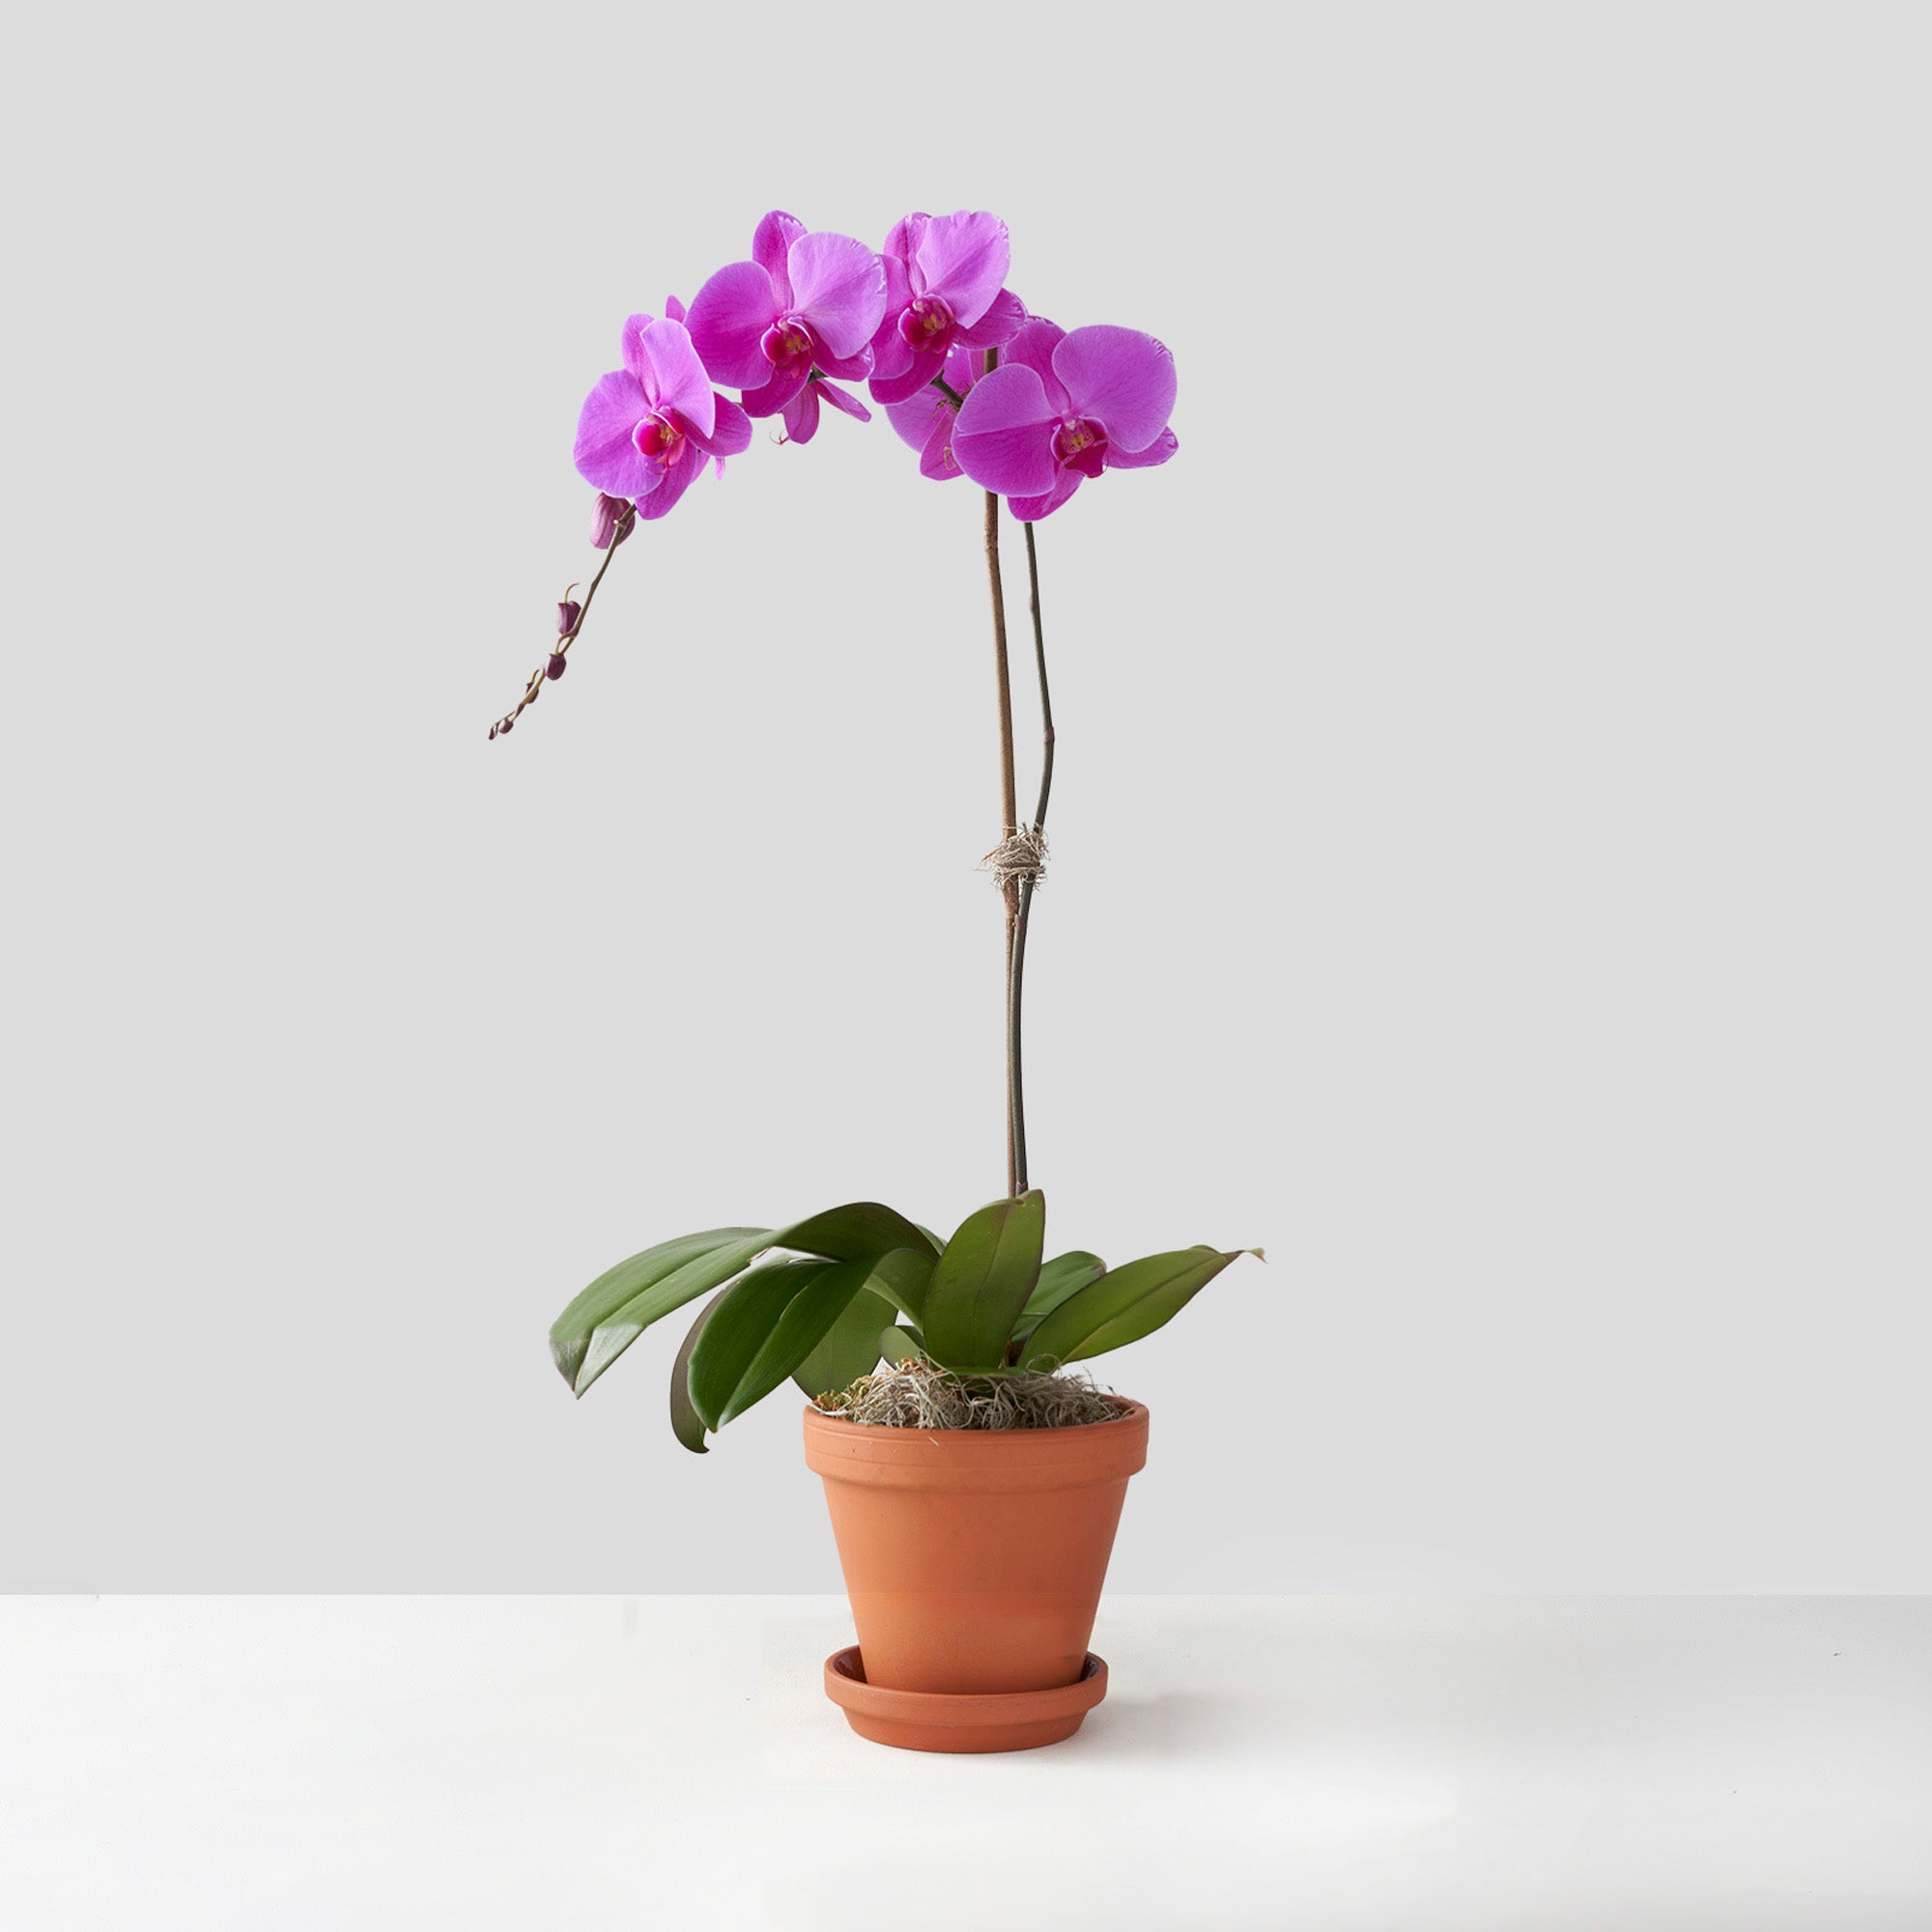 Fuchsia pink phalaenopsis orchid plant in clay pte with saucer centered on white background.